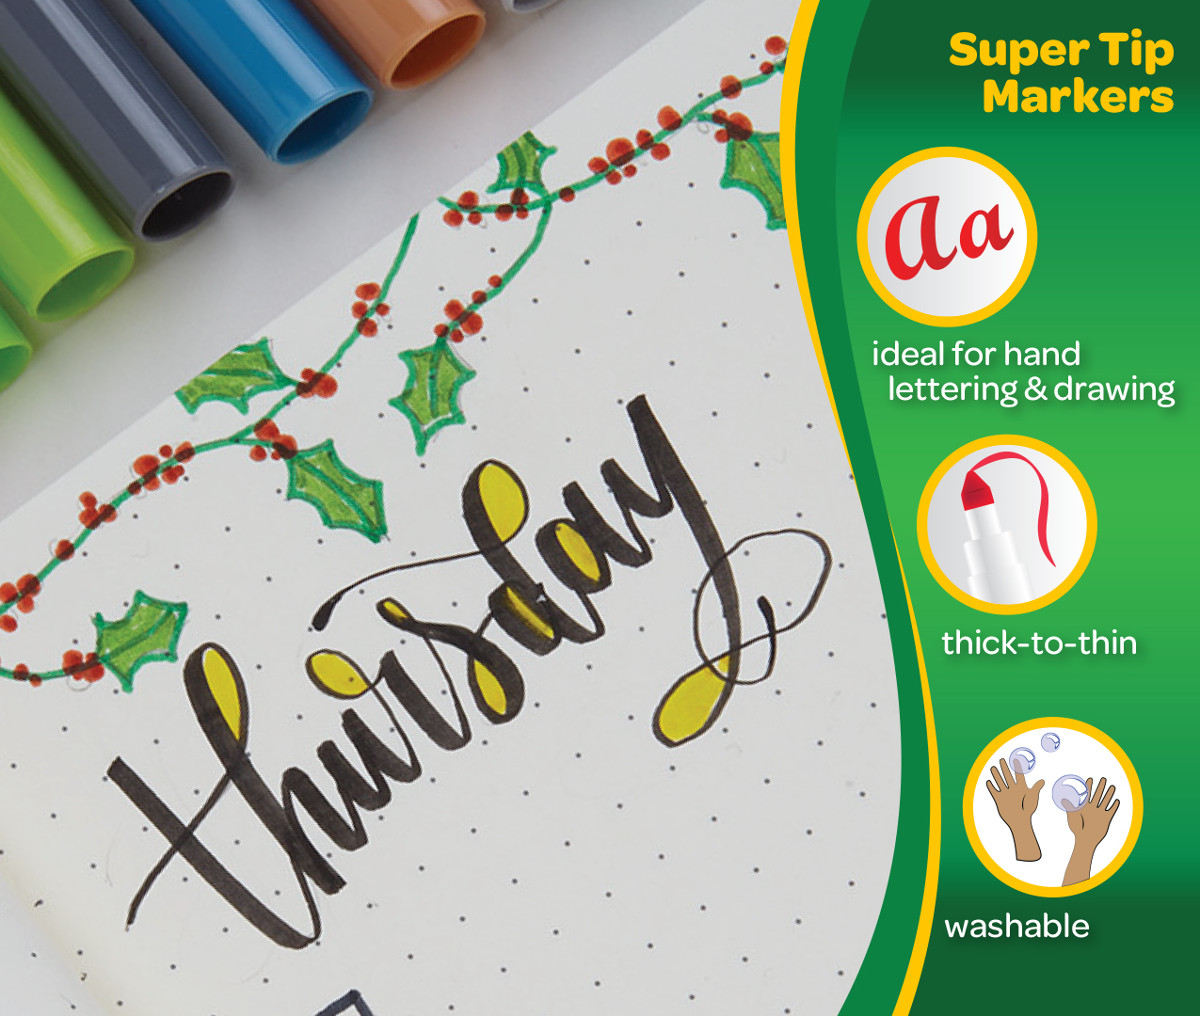 Crayola Super Tips Washable Markers – little island crafts